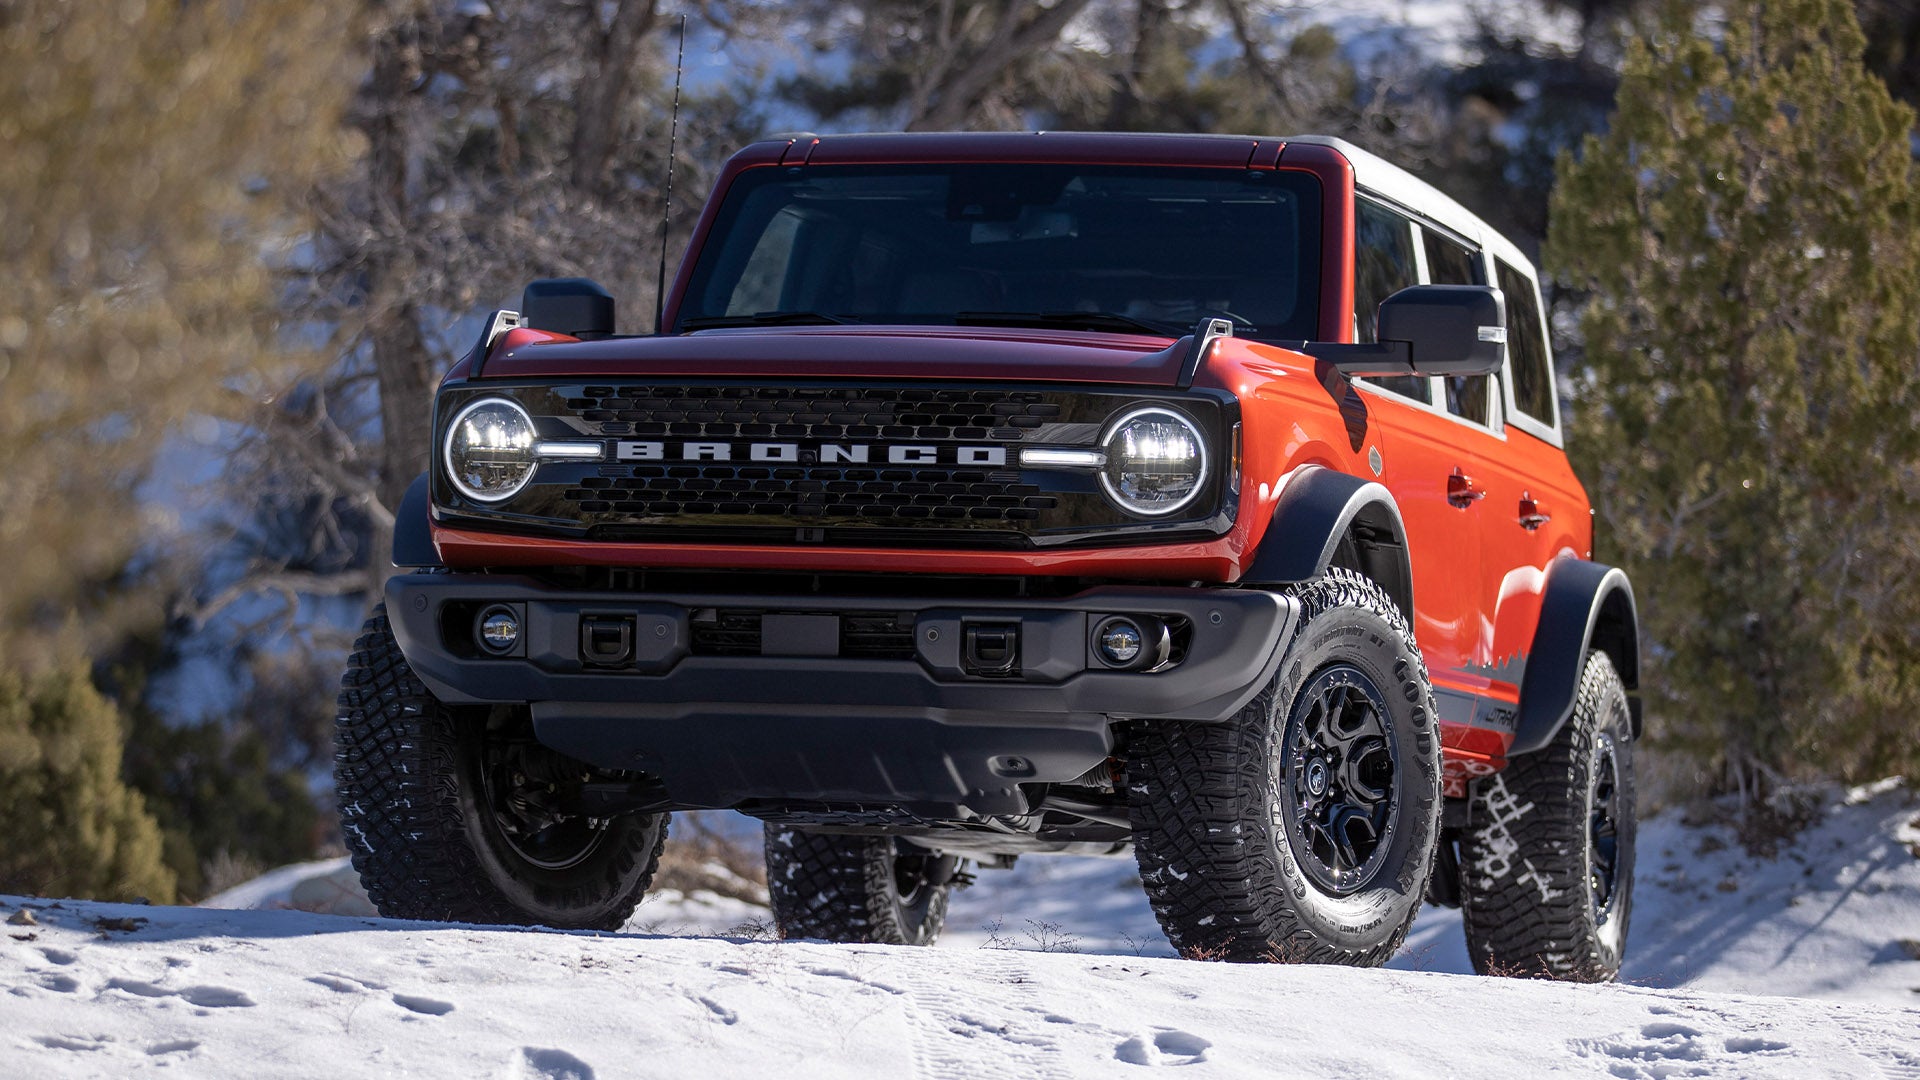 Ford Is Paying Bronco Order Holders $2,500 to Buy Something Else